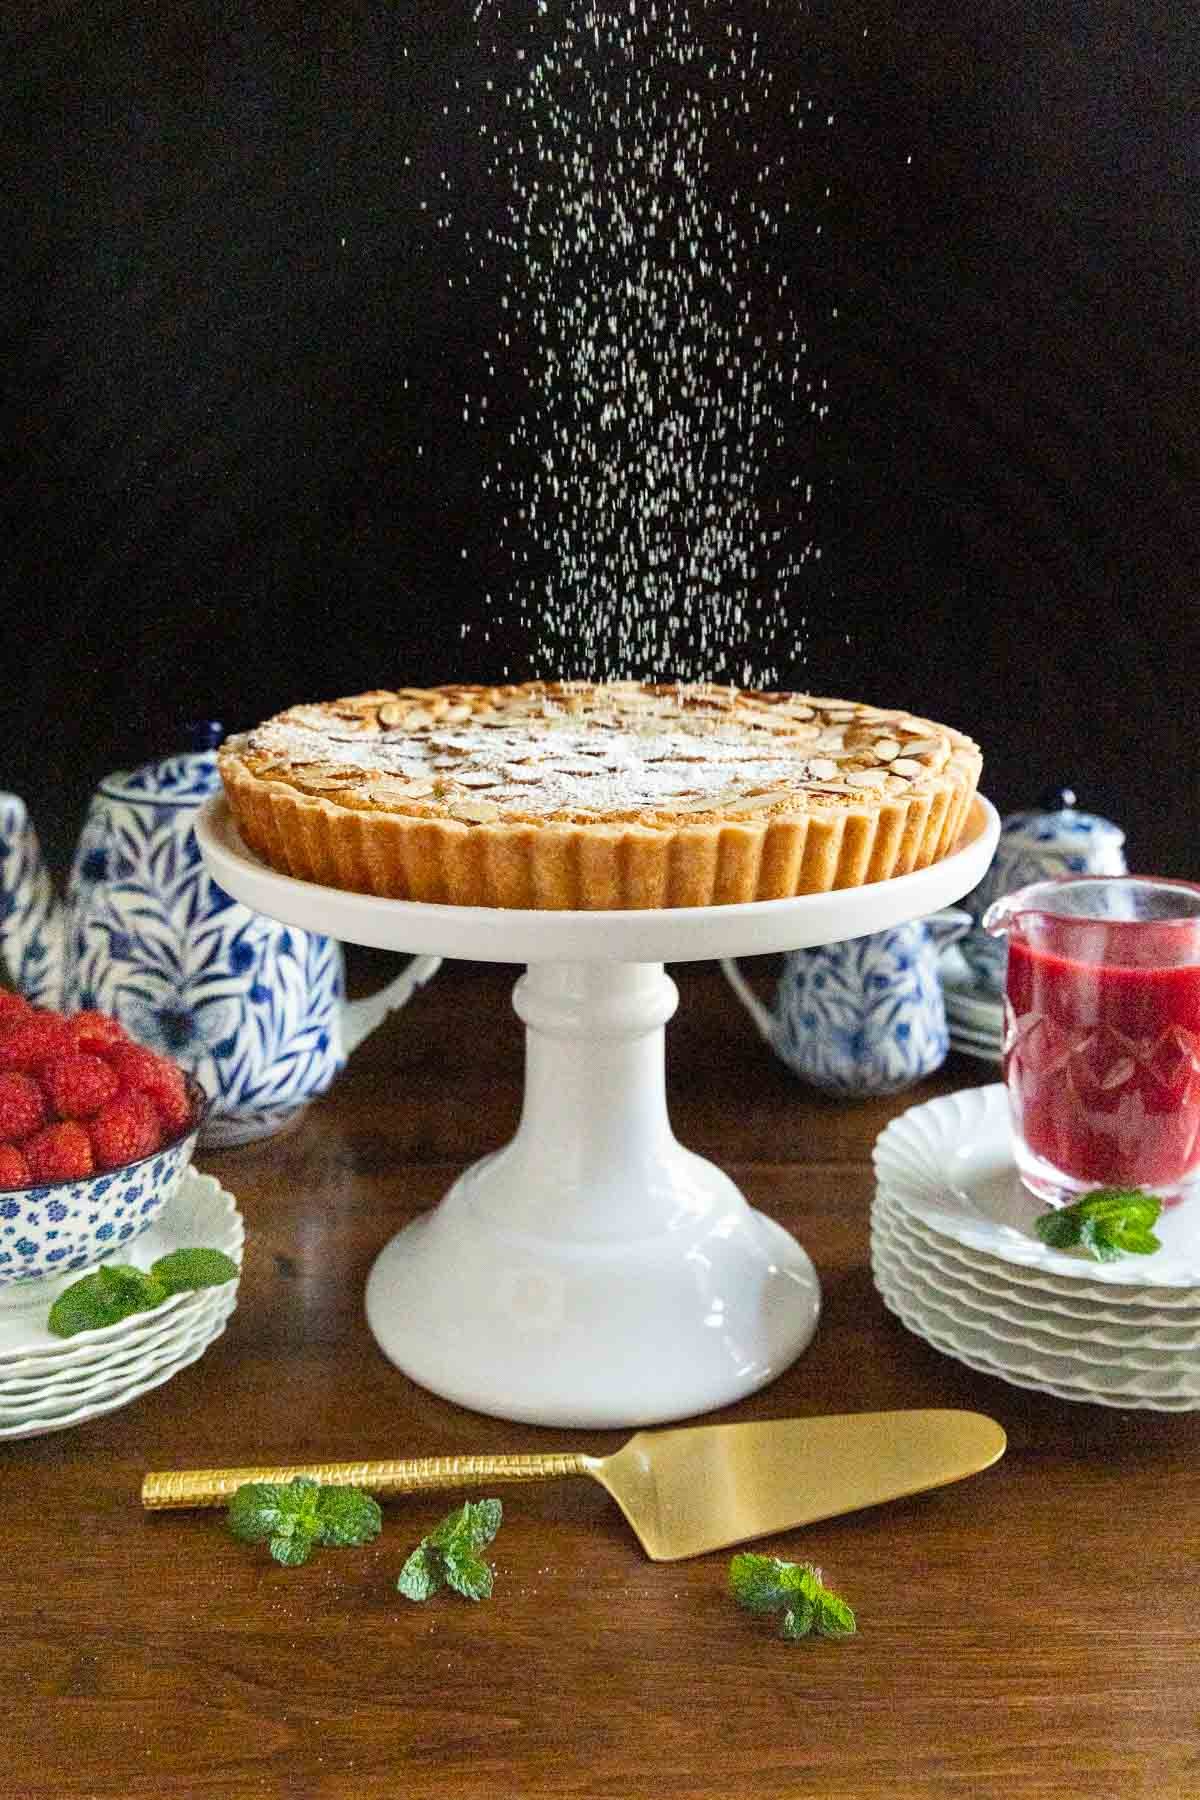 Vertical photo of a Ridiculously Easy French Almond Frangipane Tart on a white pedestal serving plate being sprinkled with powdered sugar.